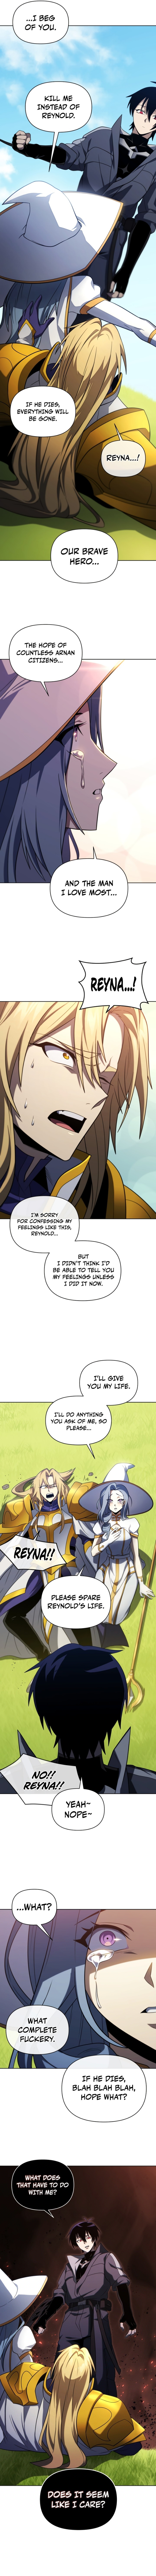 Player Who Returned 10,000 Years Later - Chapter 42 Page 4